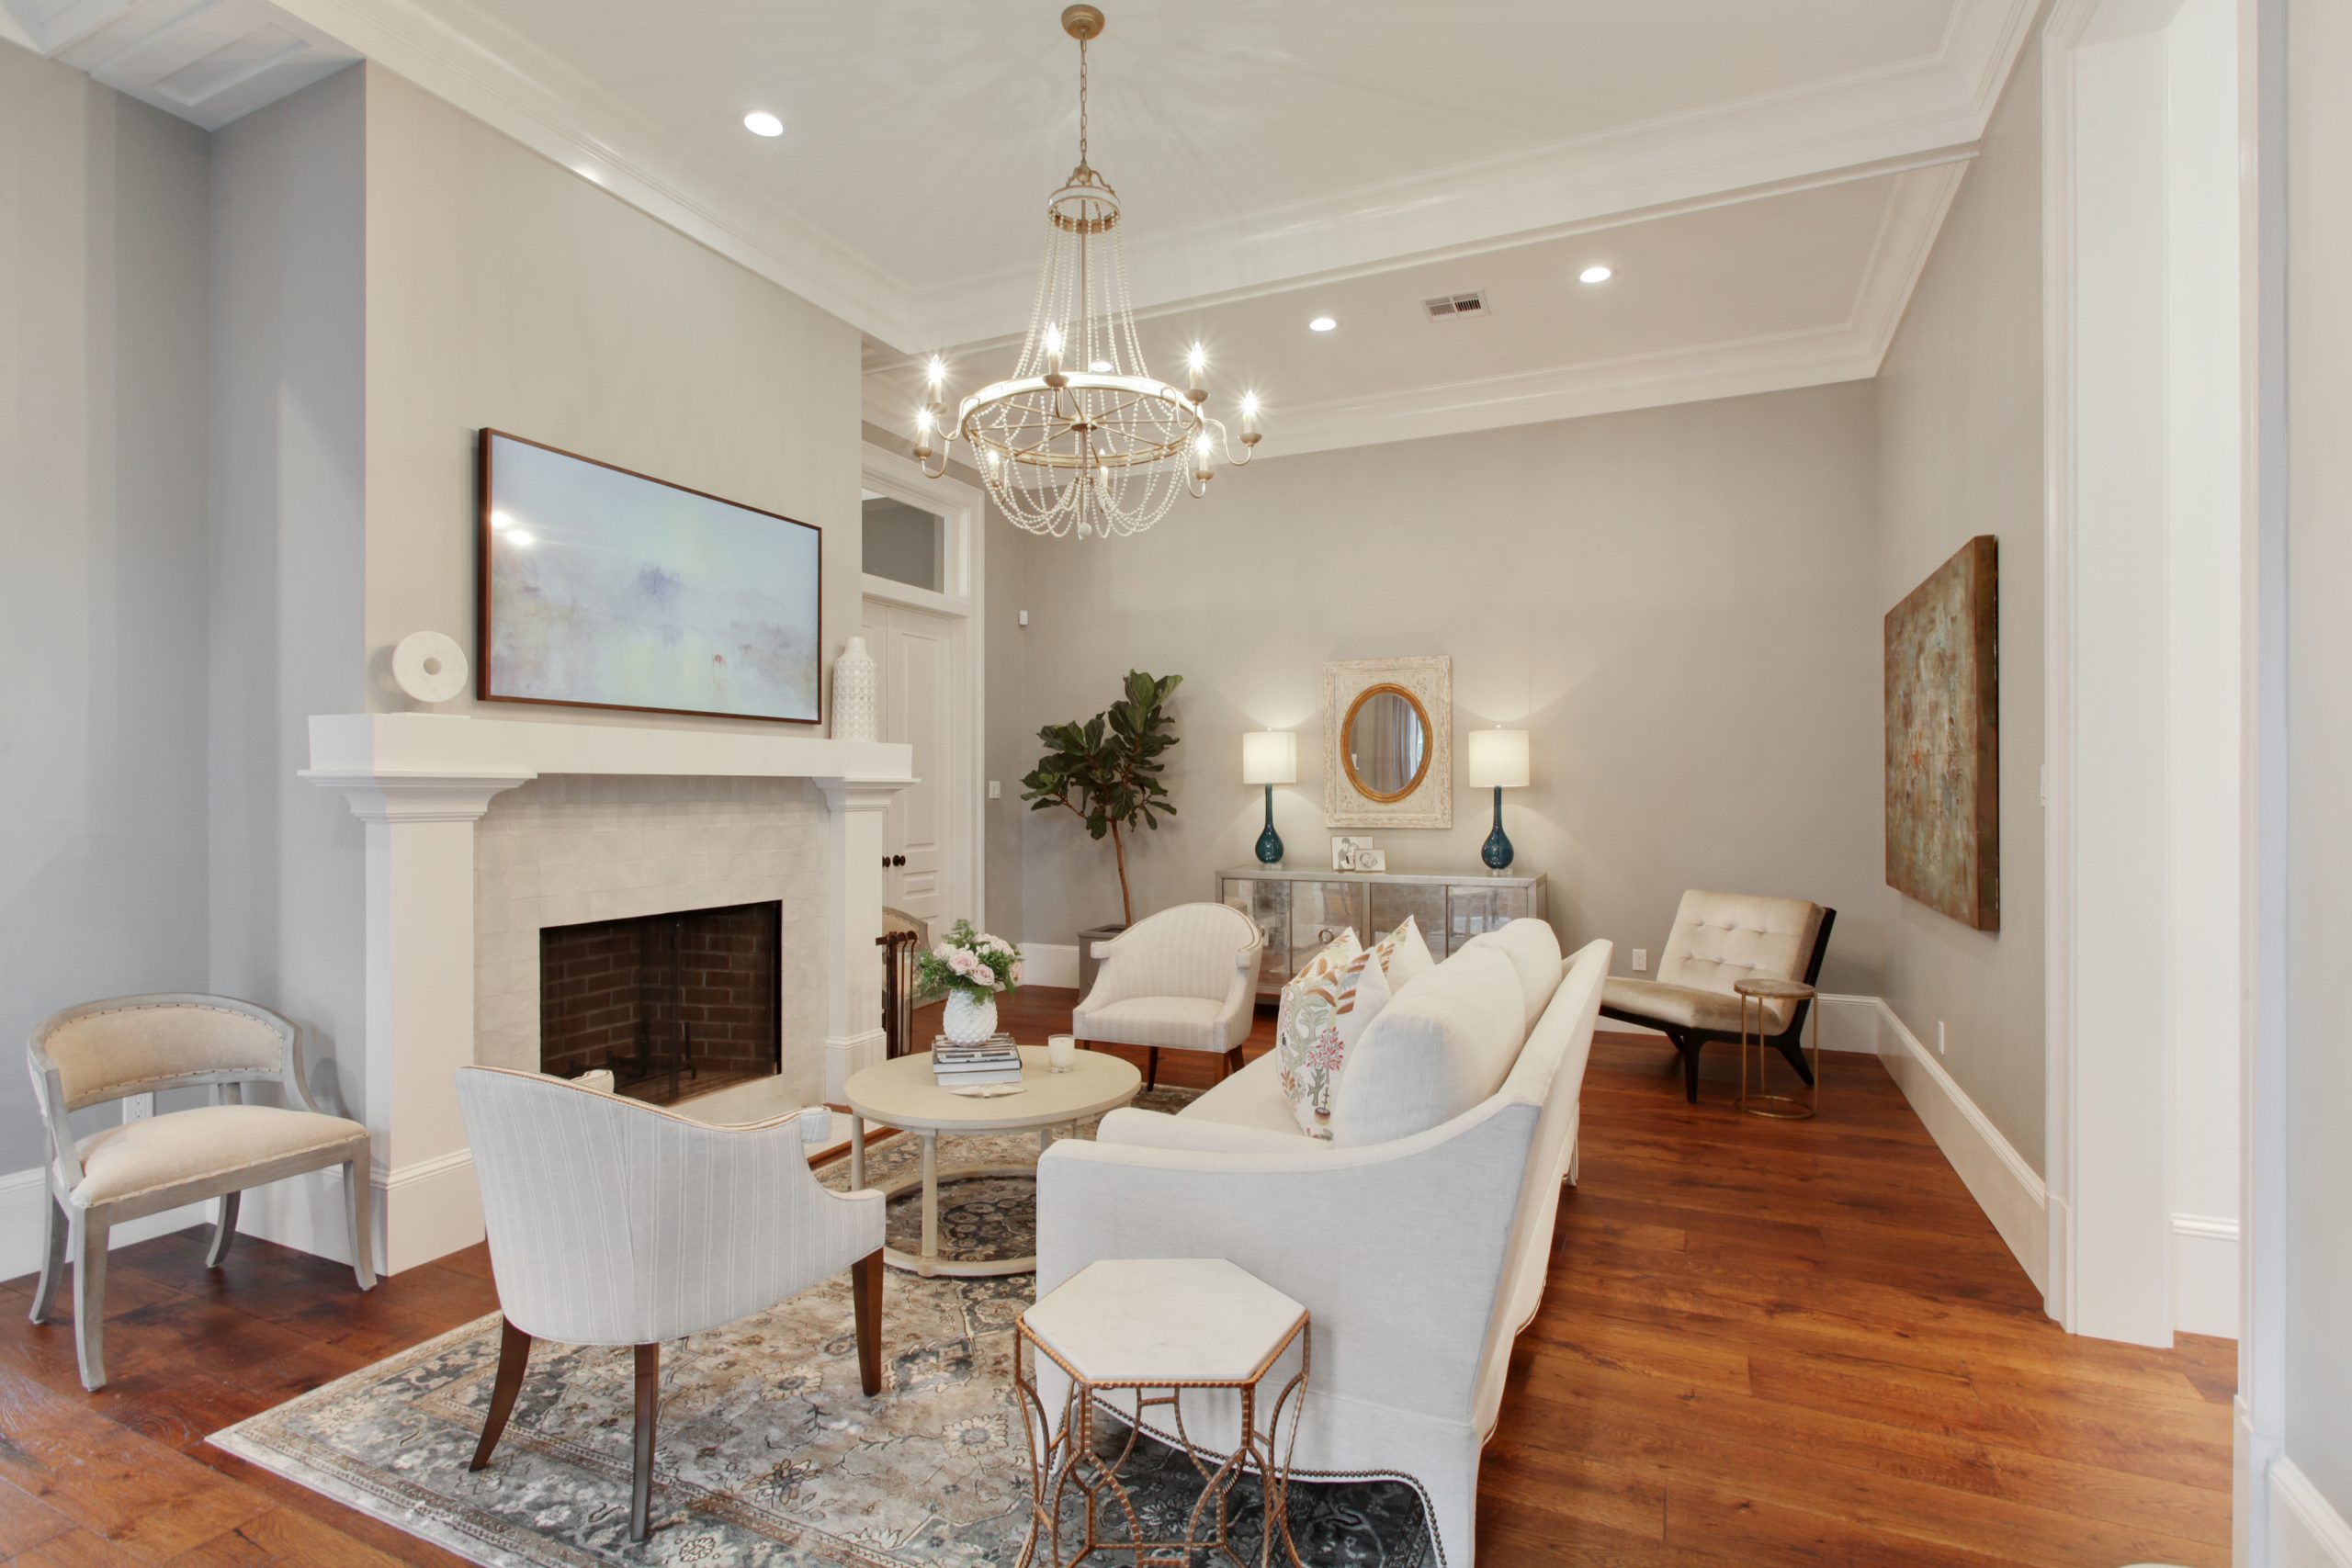 Luxury formal living room of Audubon House new construction home designed and built by DMG